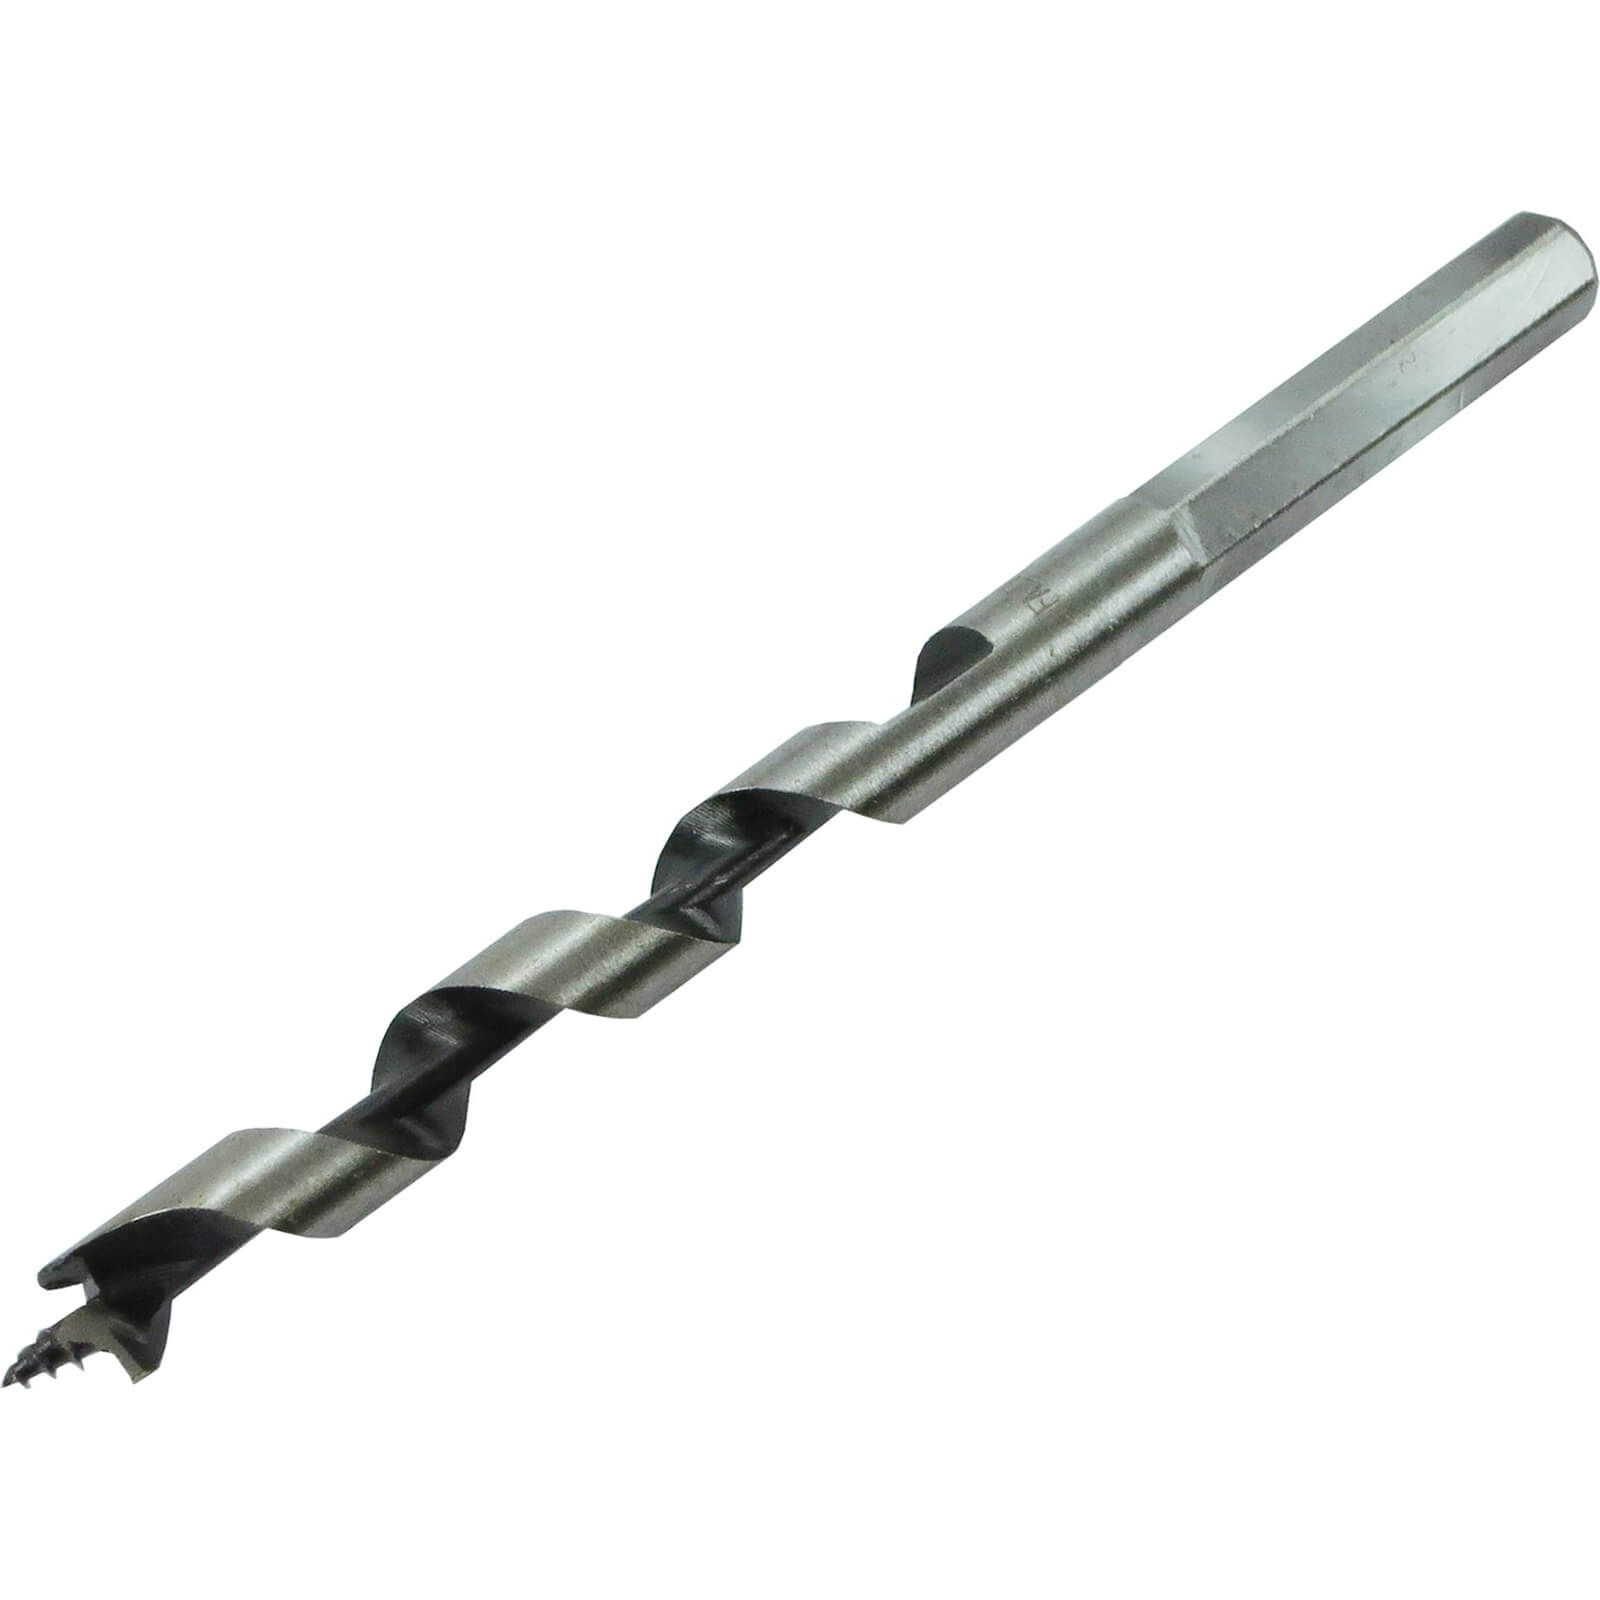 Image of Faithfull Combination Auger Drill Bit 10mm 120mm